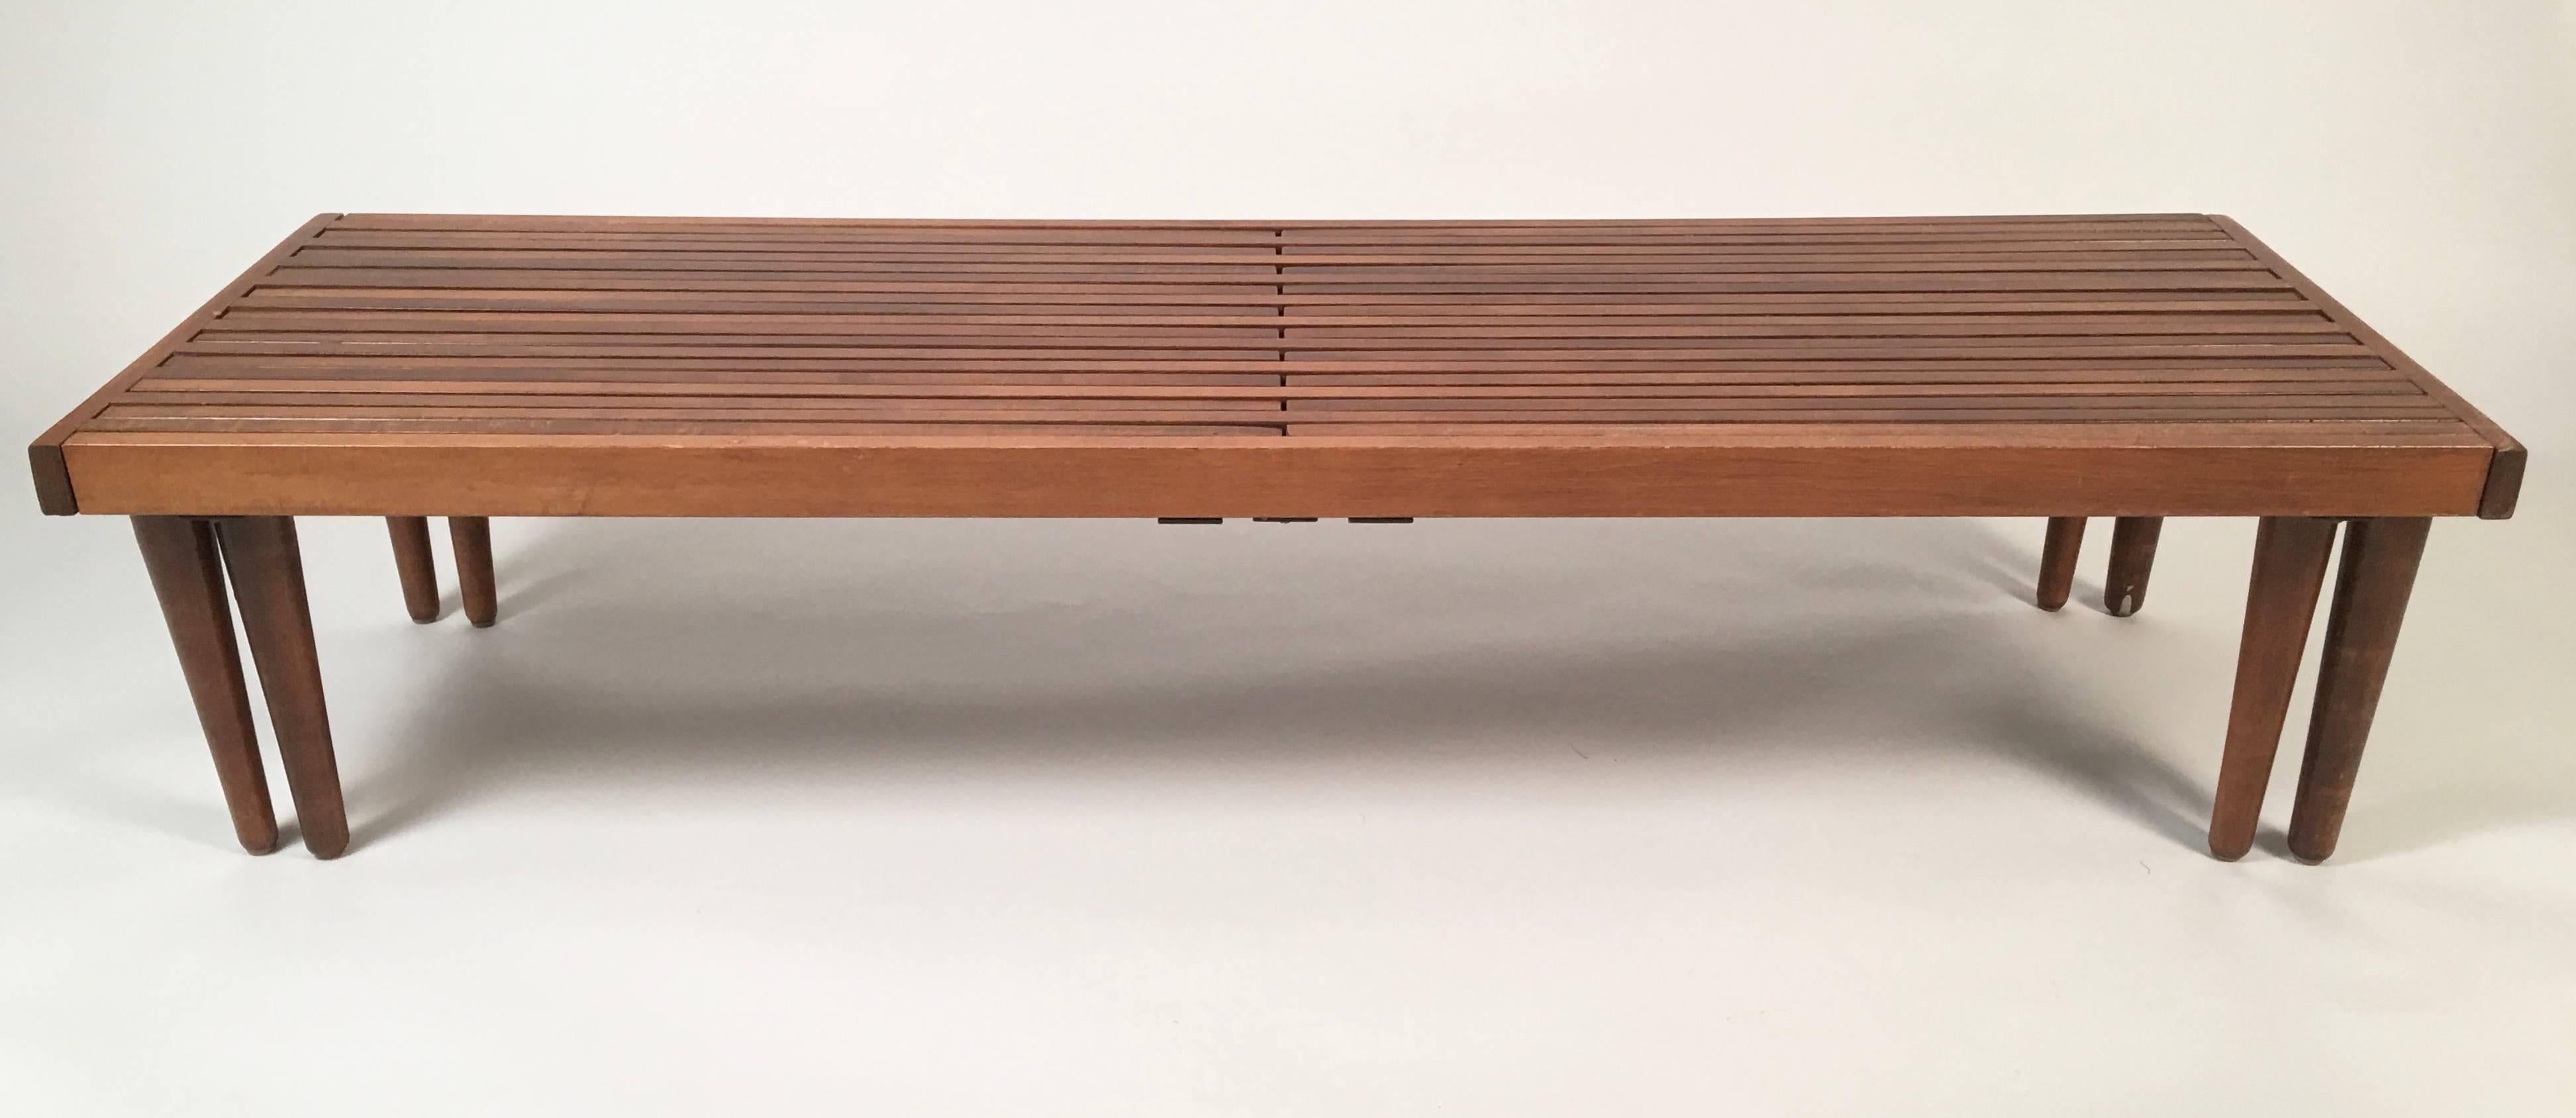 An adjustable length Mid-Century Modern slat wood coffee table or bench which telescopes in and out from a minimum length of 55 1/2 inches to a maximum length of 8 feet, with metal straps underneath the top for added strength, supported by 8